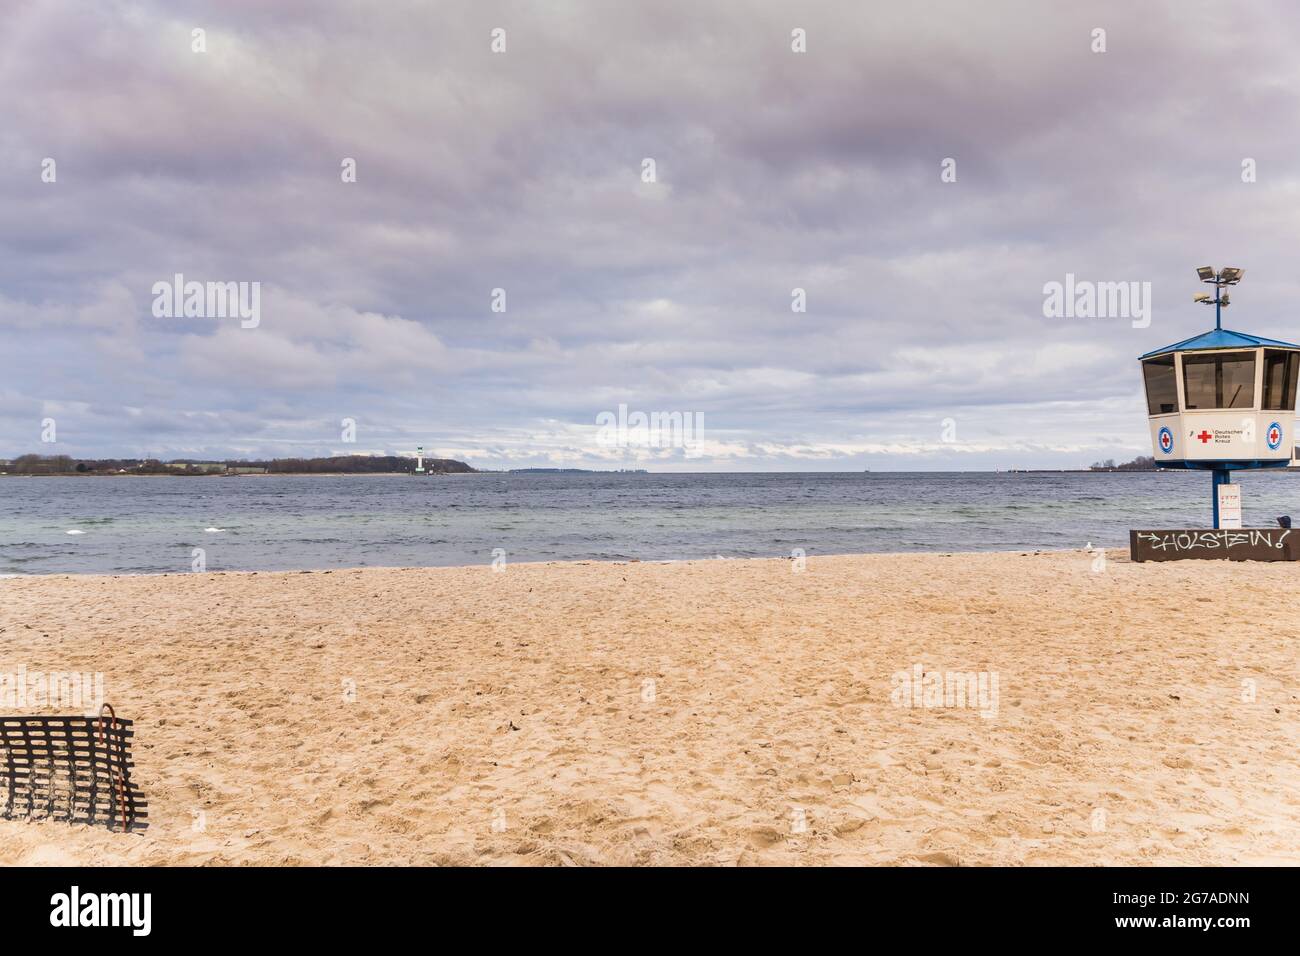 On the beach of Heikendorf in autumn with a view of the Kiel Fjord, Kiel, Germany. Stock Photo